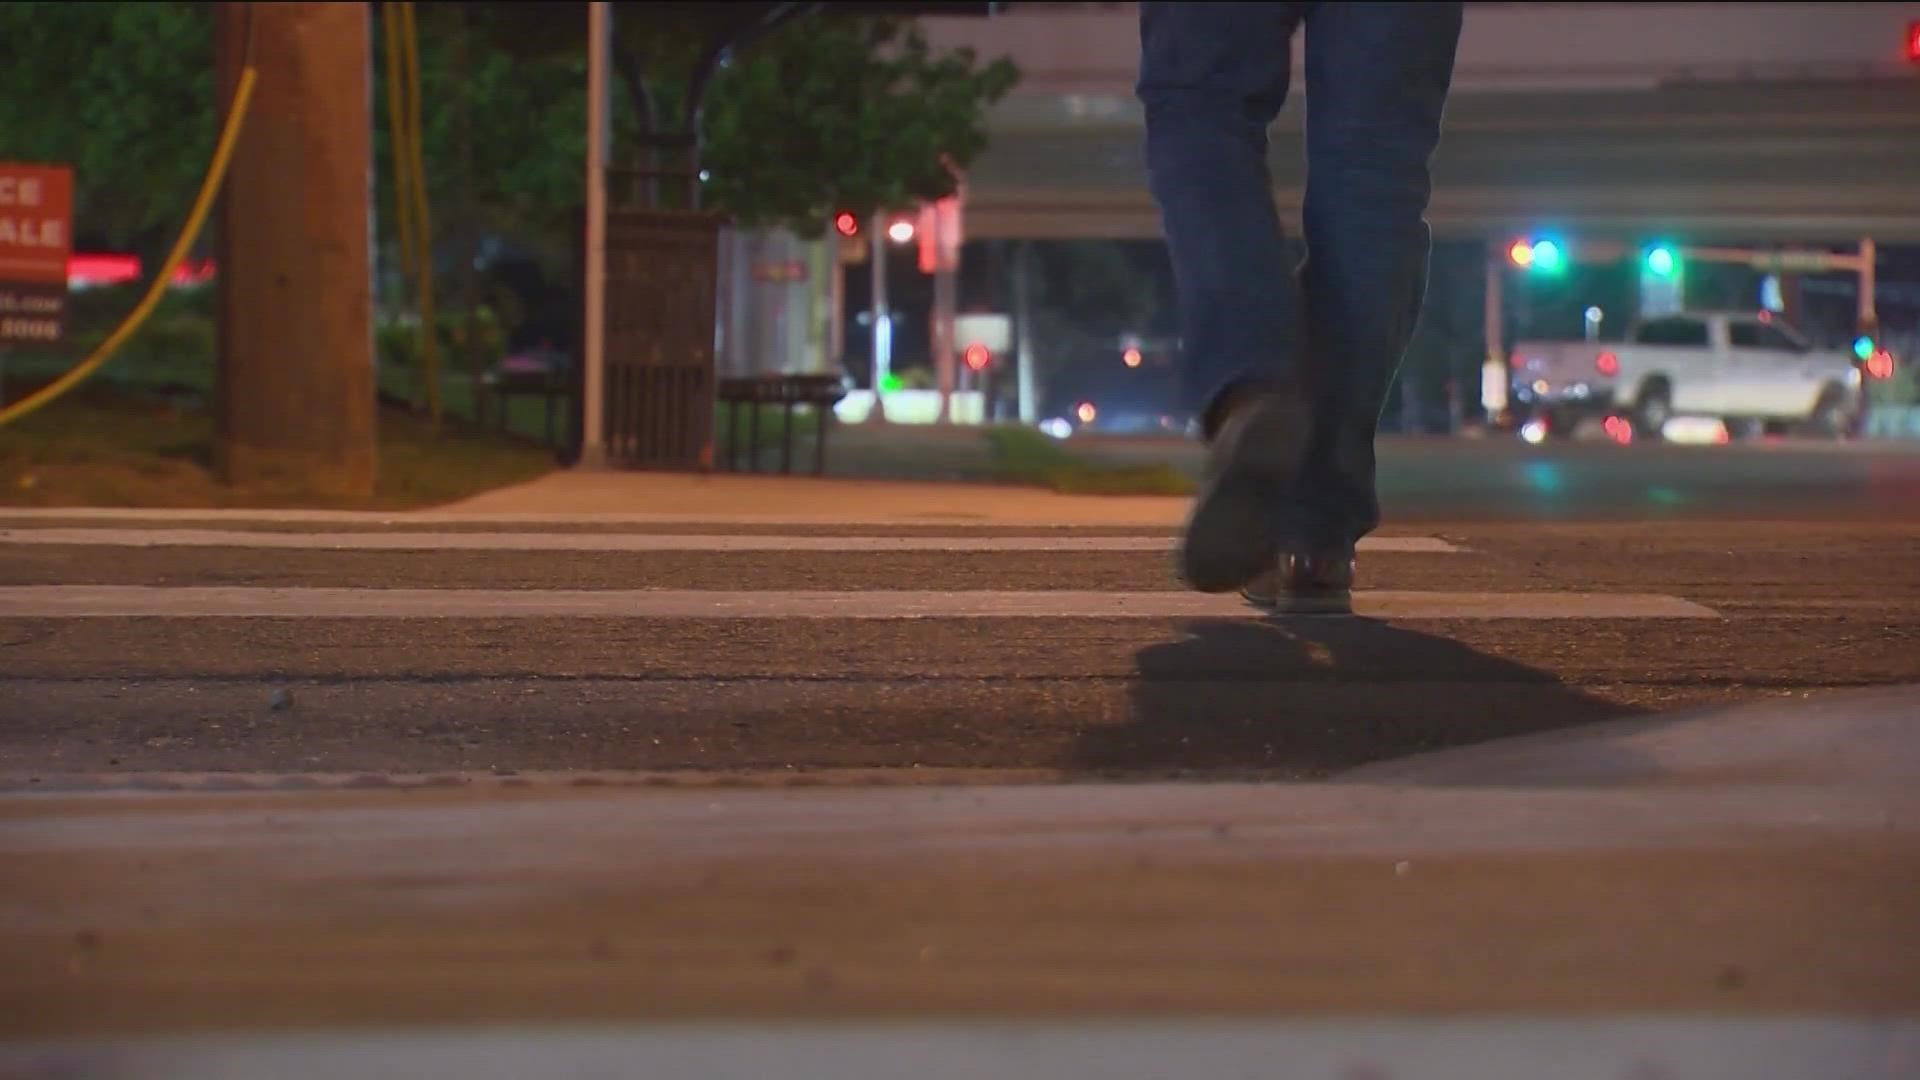 The City of Austin is receiving more than $22 million to make streets safer. The grant money will be used to help underserved communities.